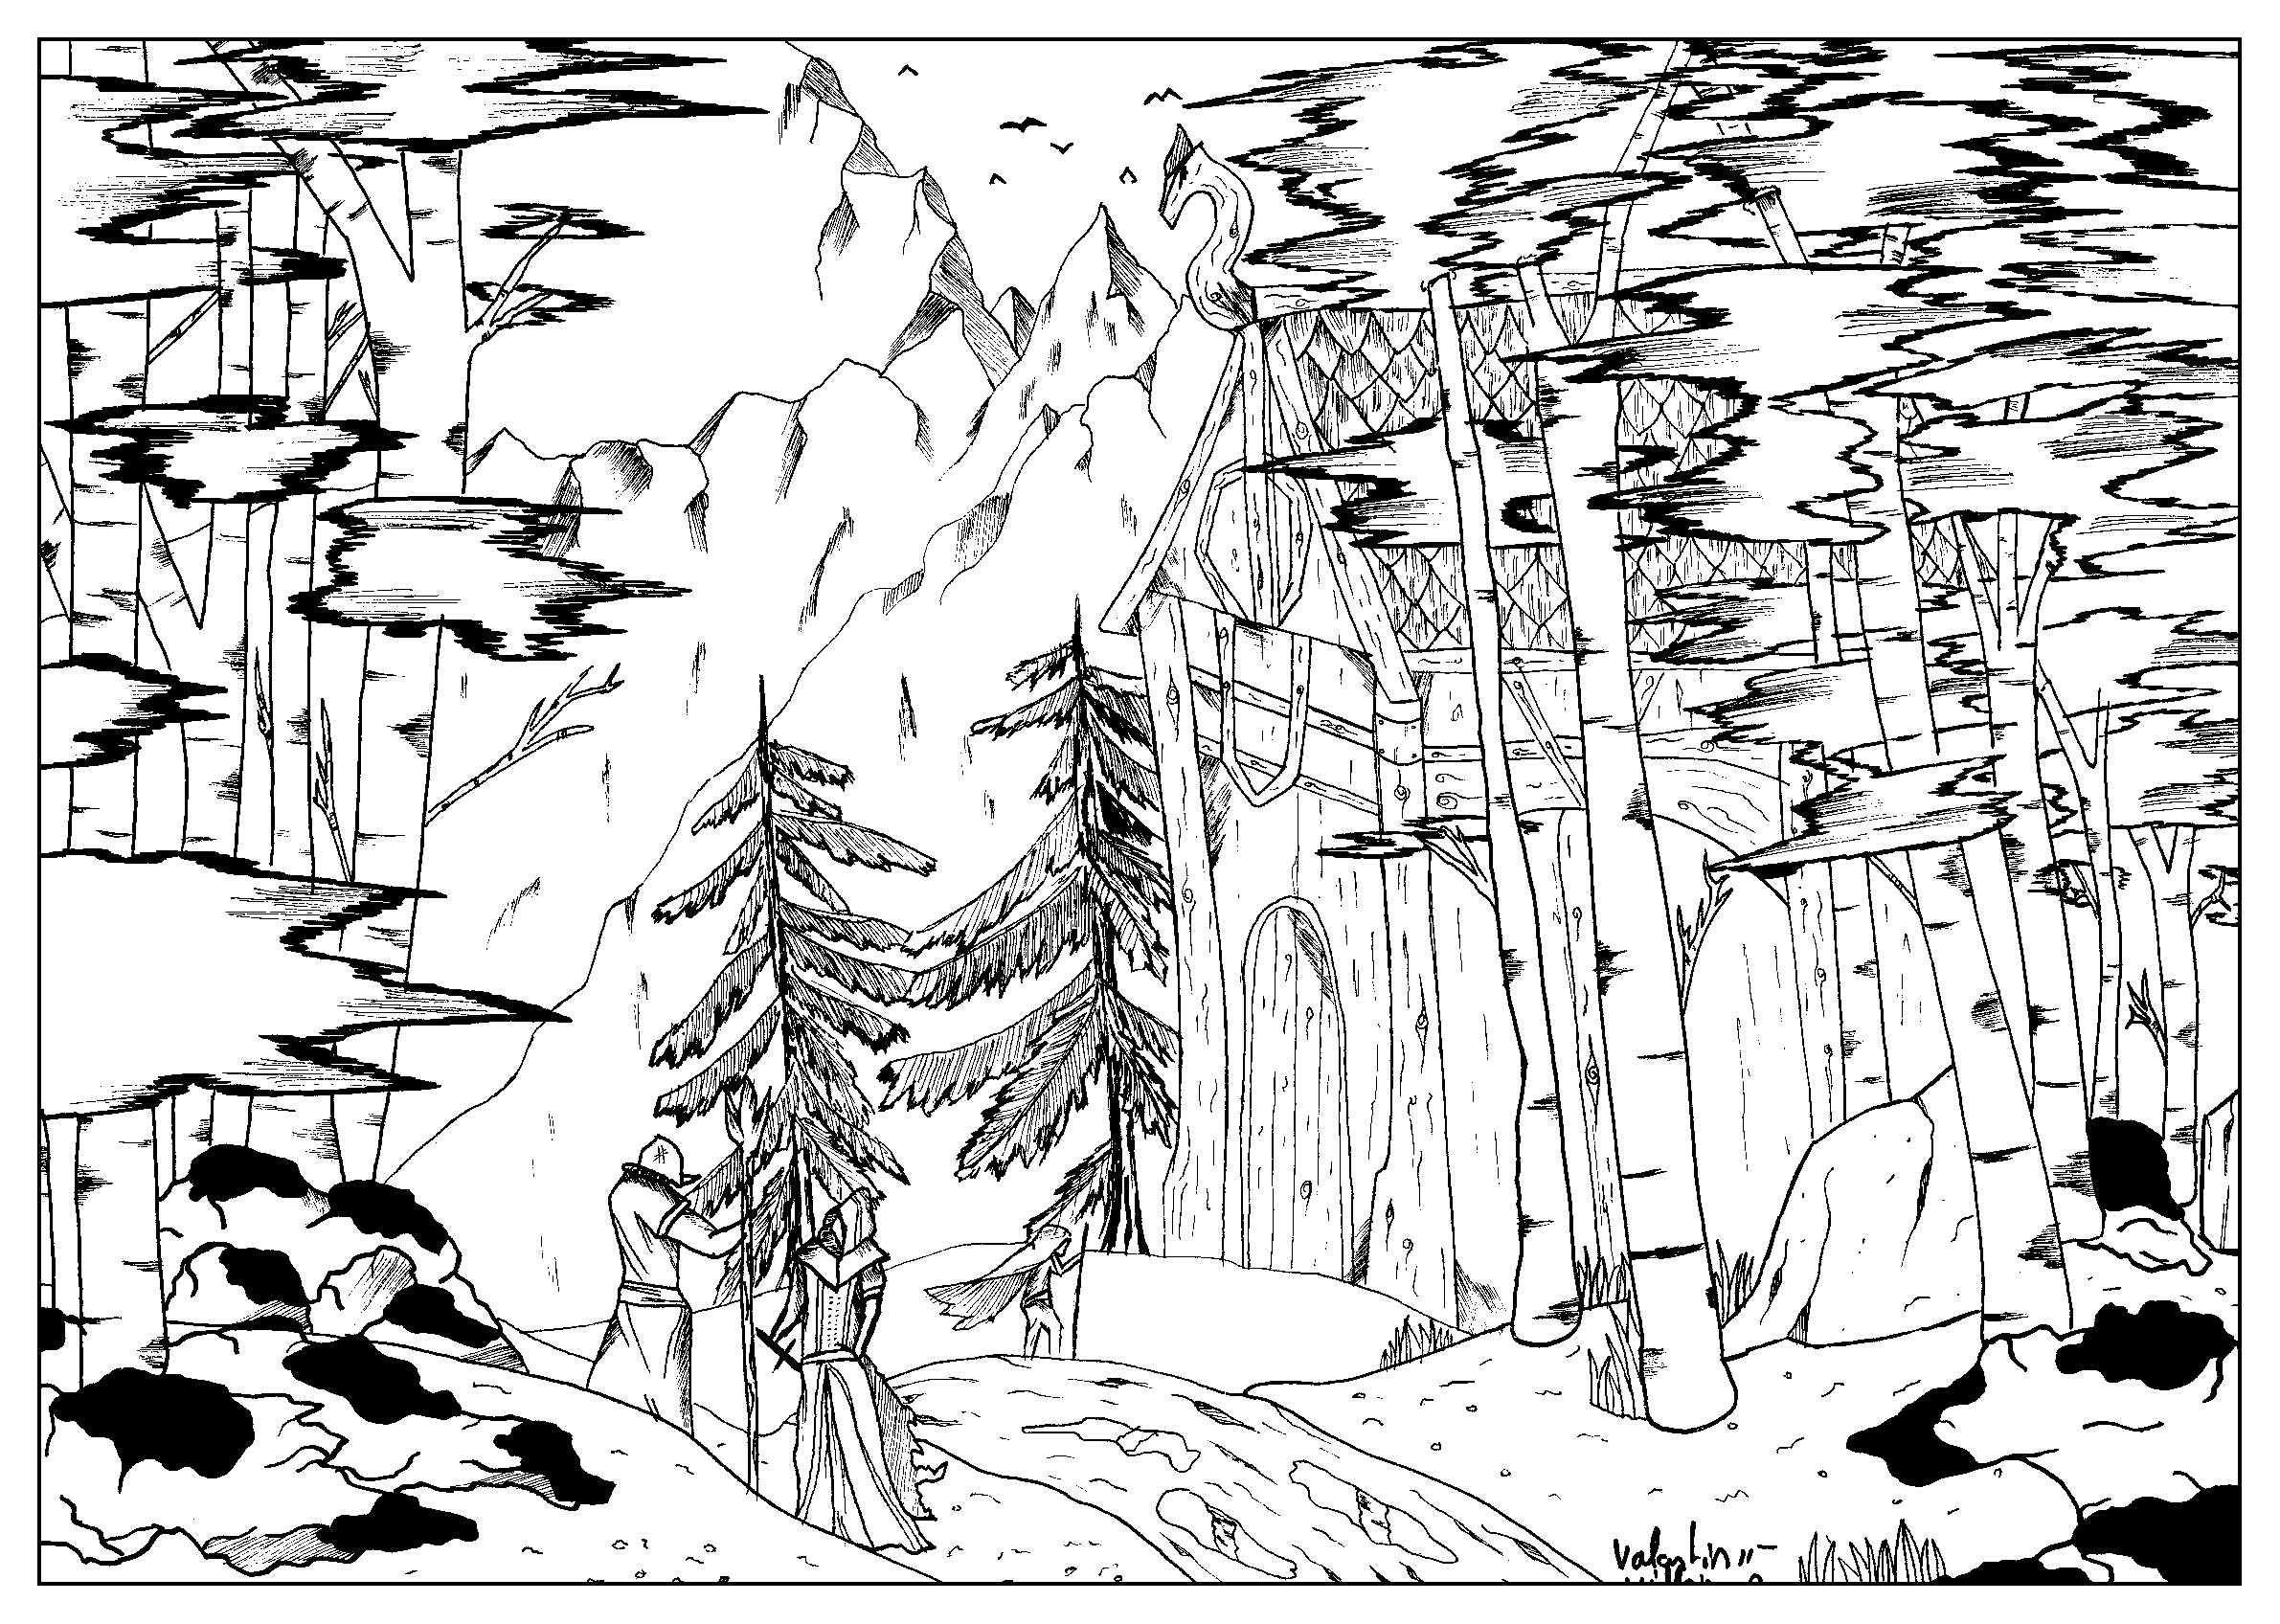 A coloring page with a viking house hidden in the forest, Artist : Valentin